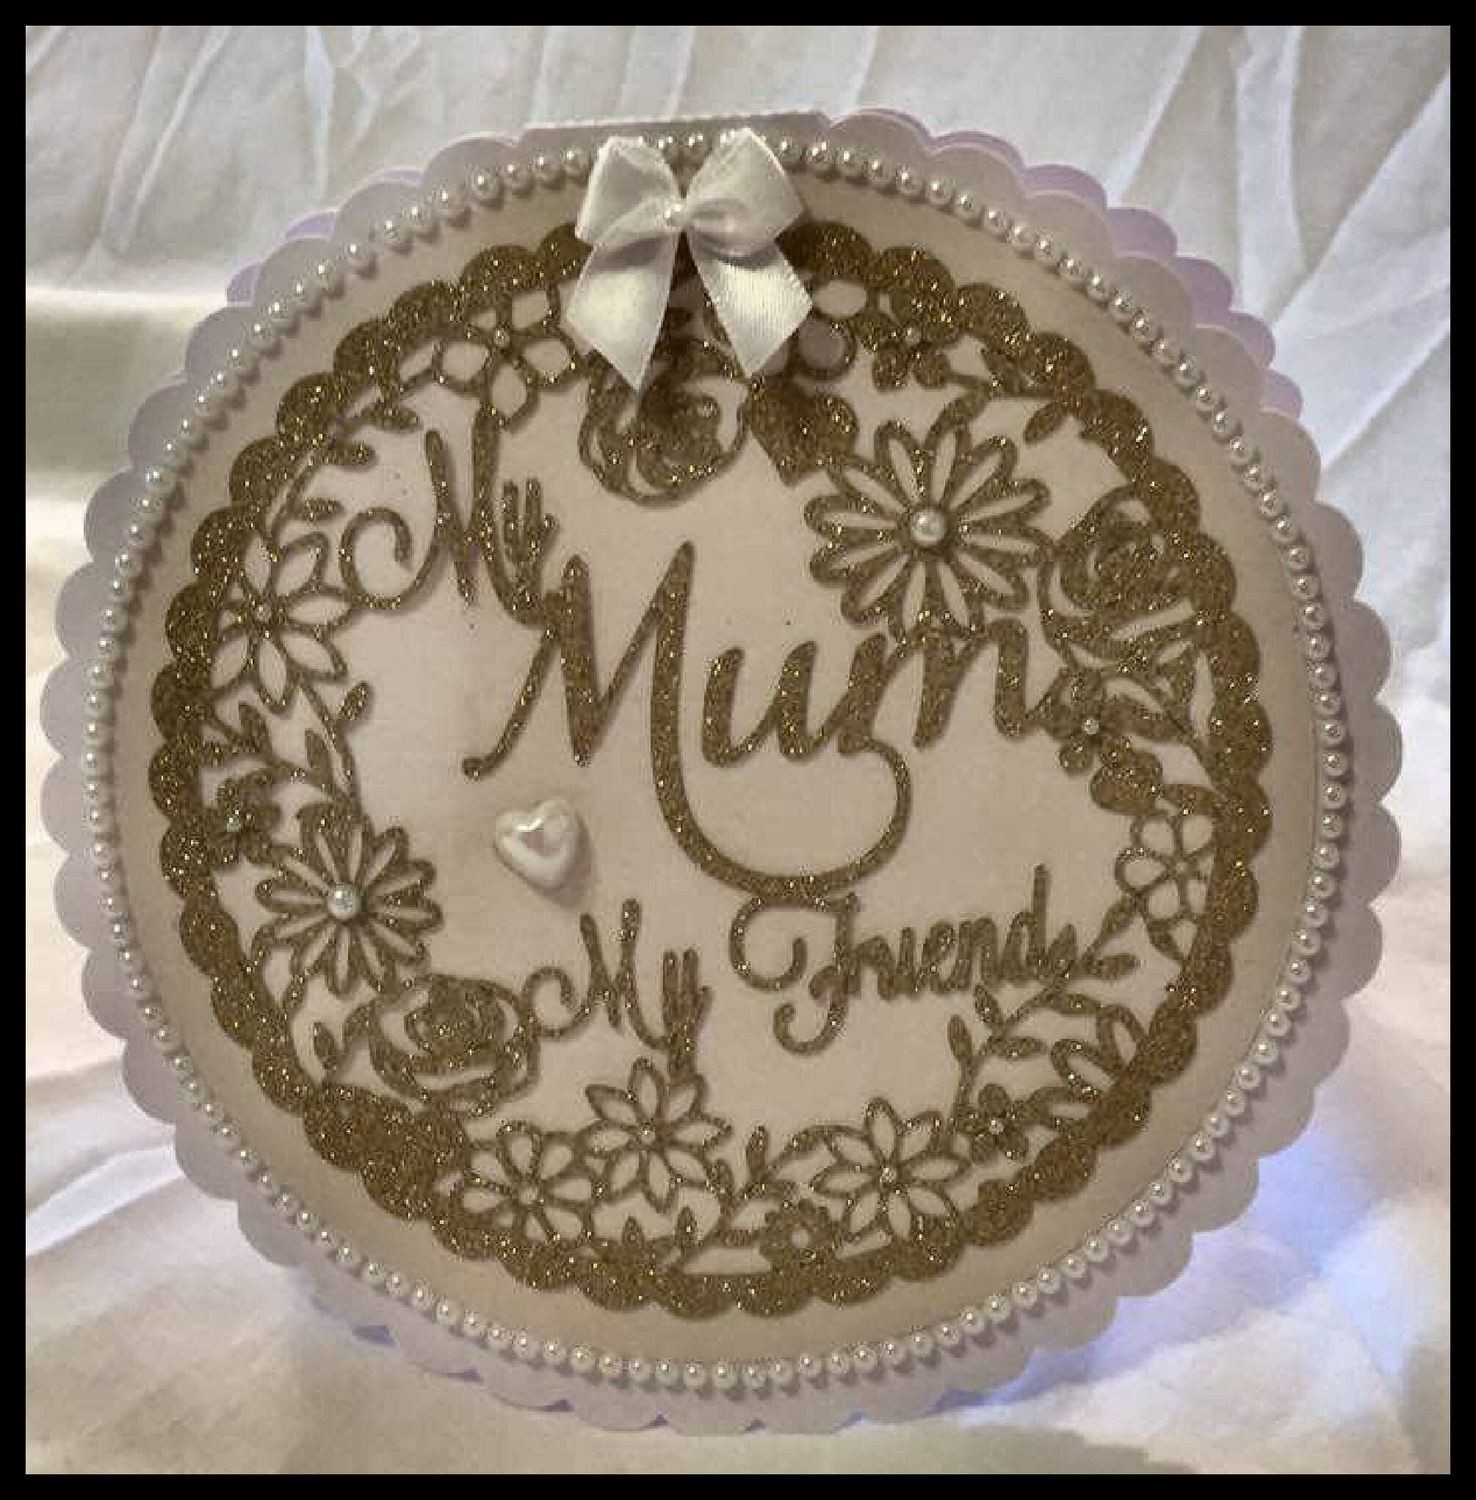 Mum My Friend - round decorative frame ideal for Mother's Day.